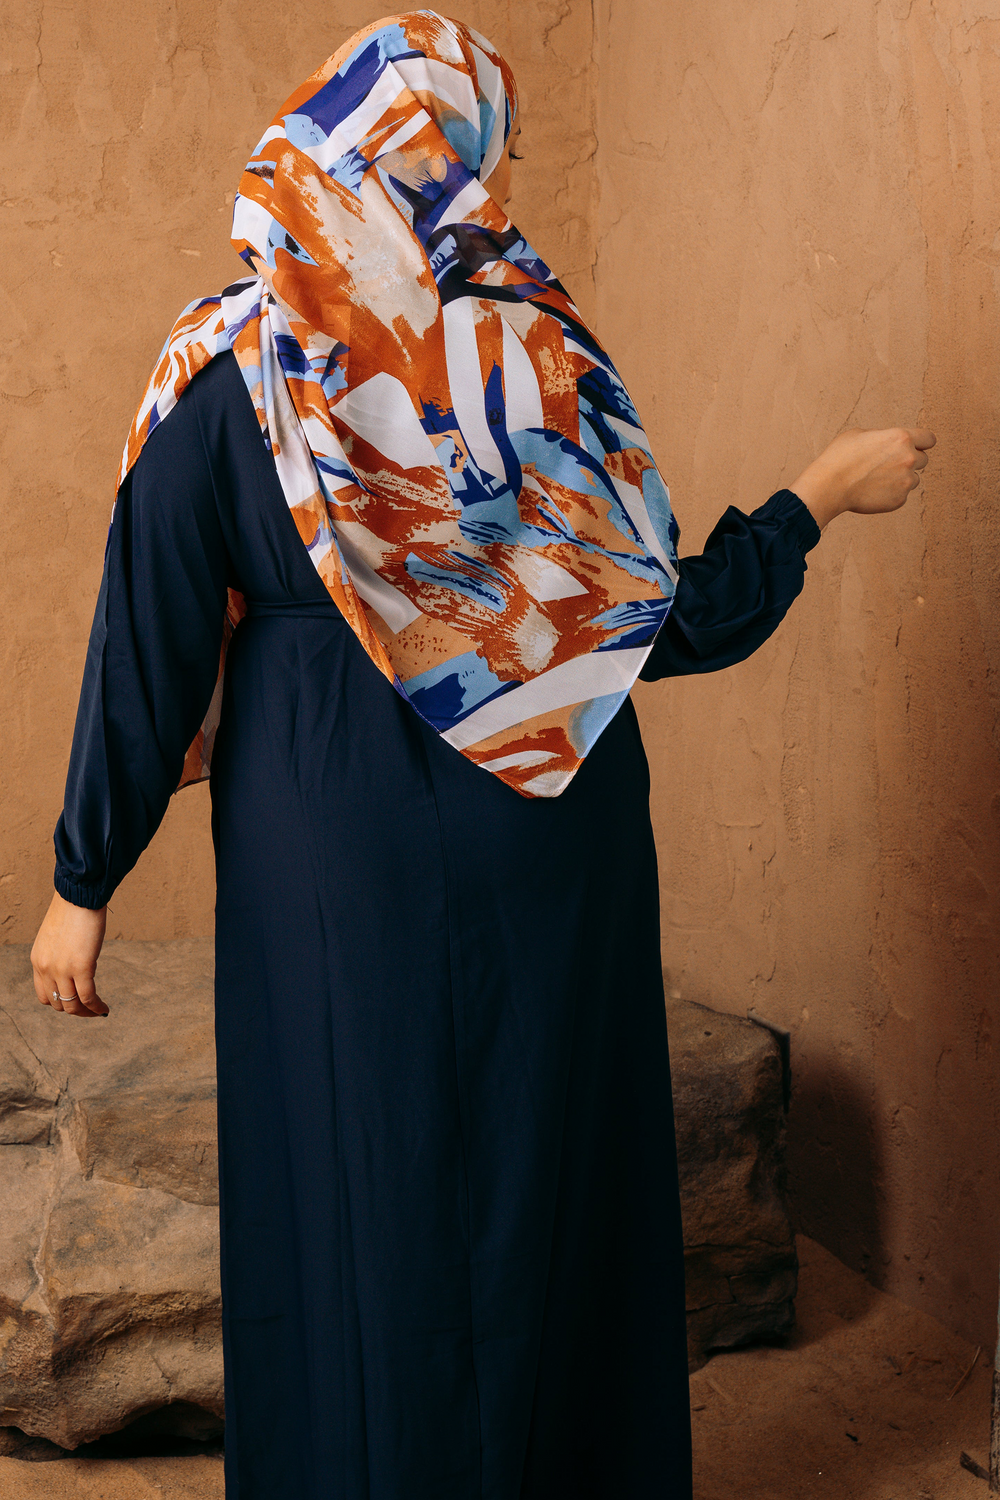 a woman wearing a blue dress and a colorful scarf